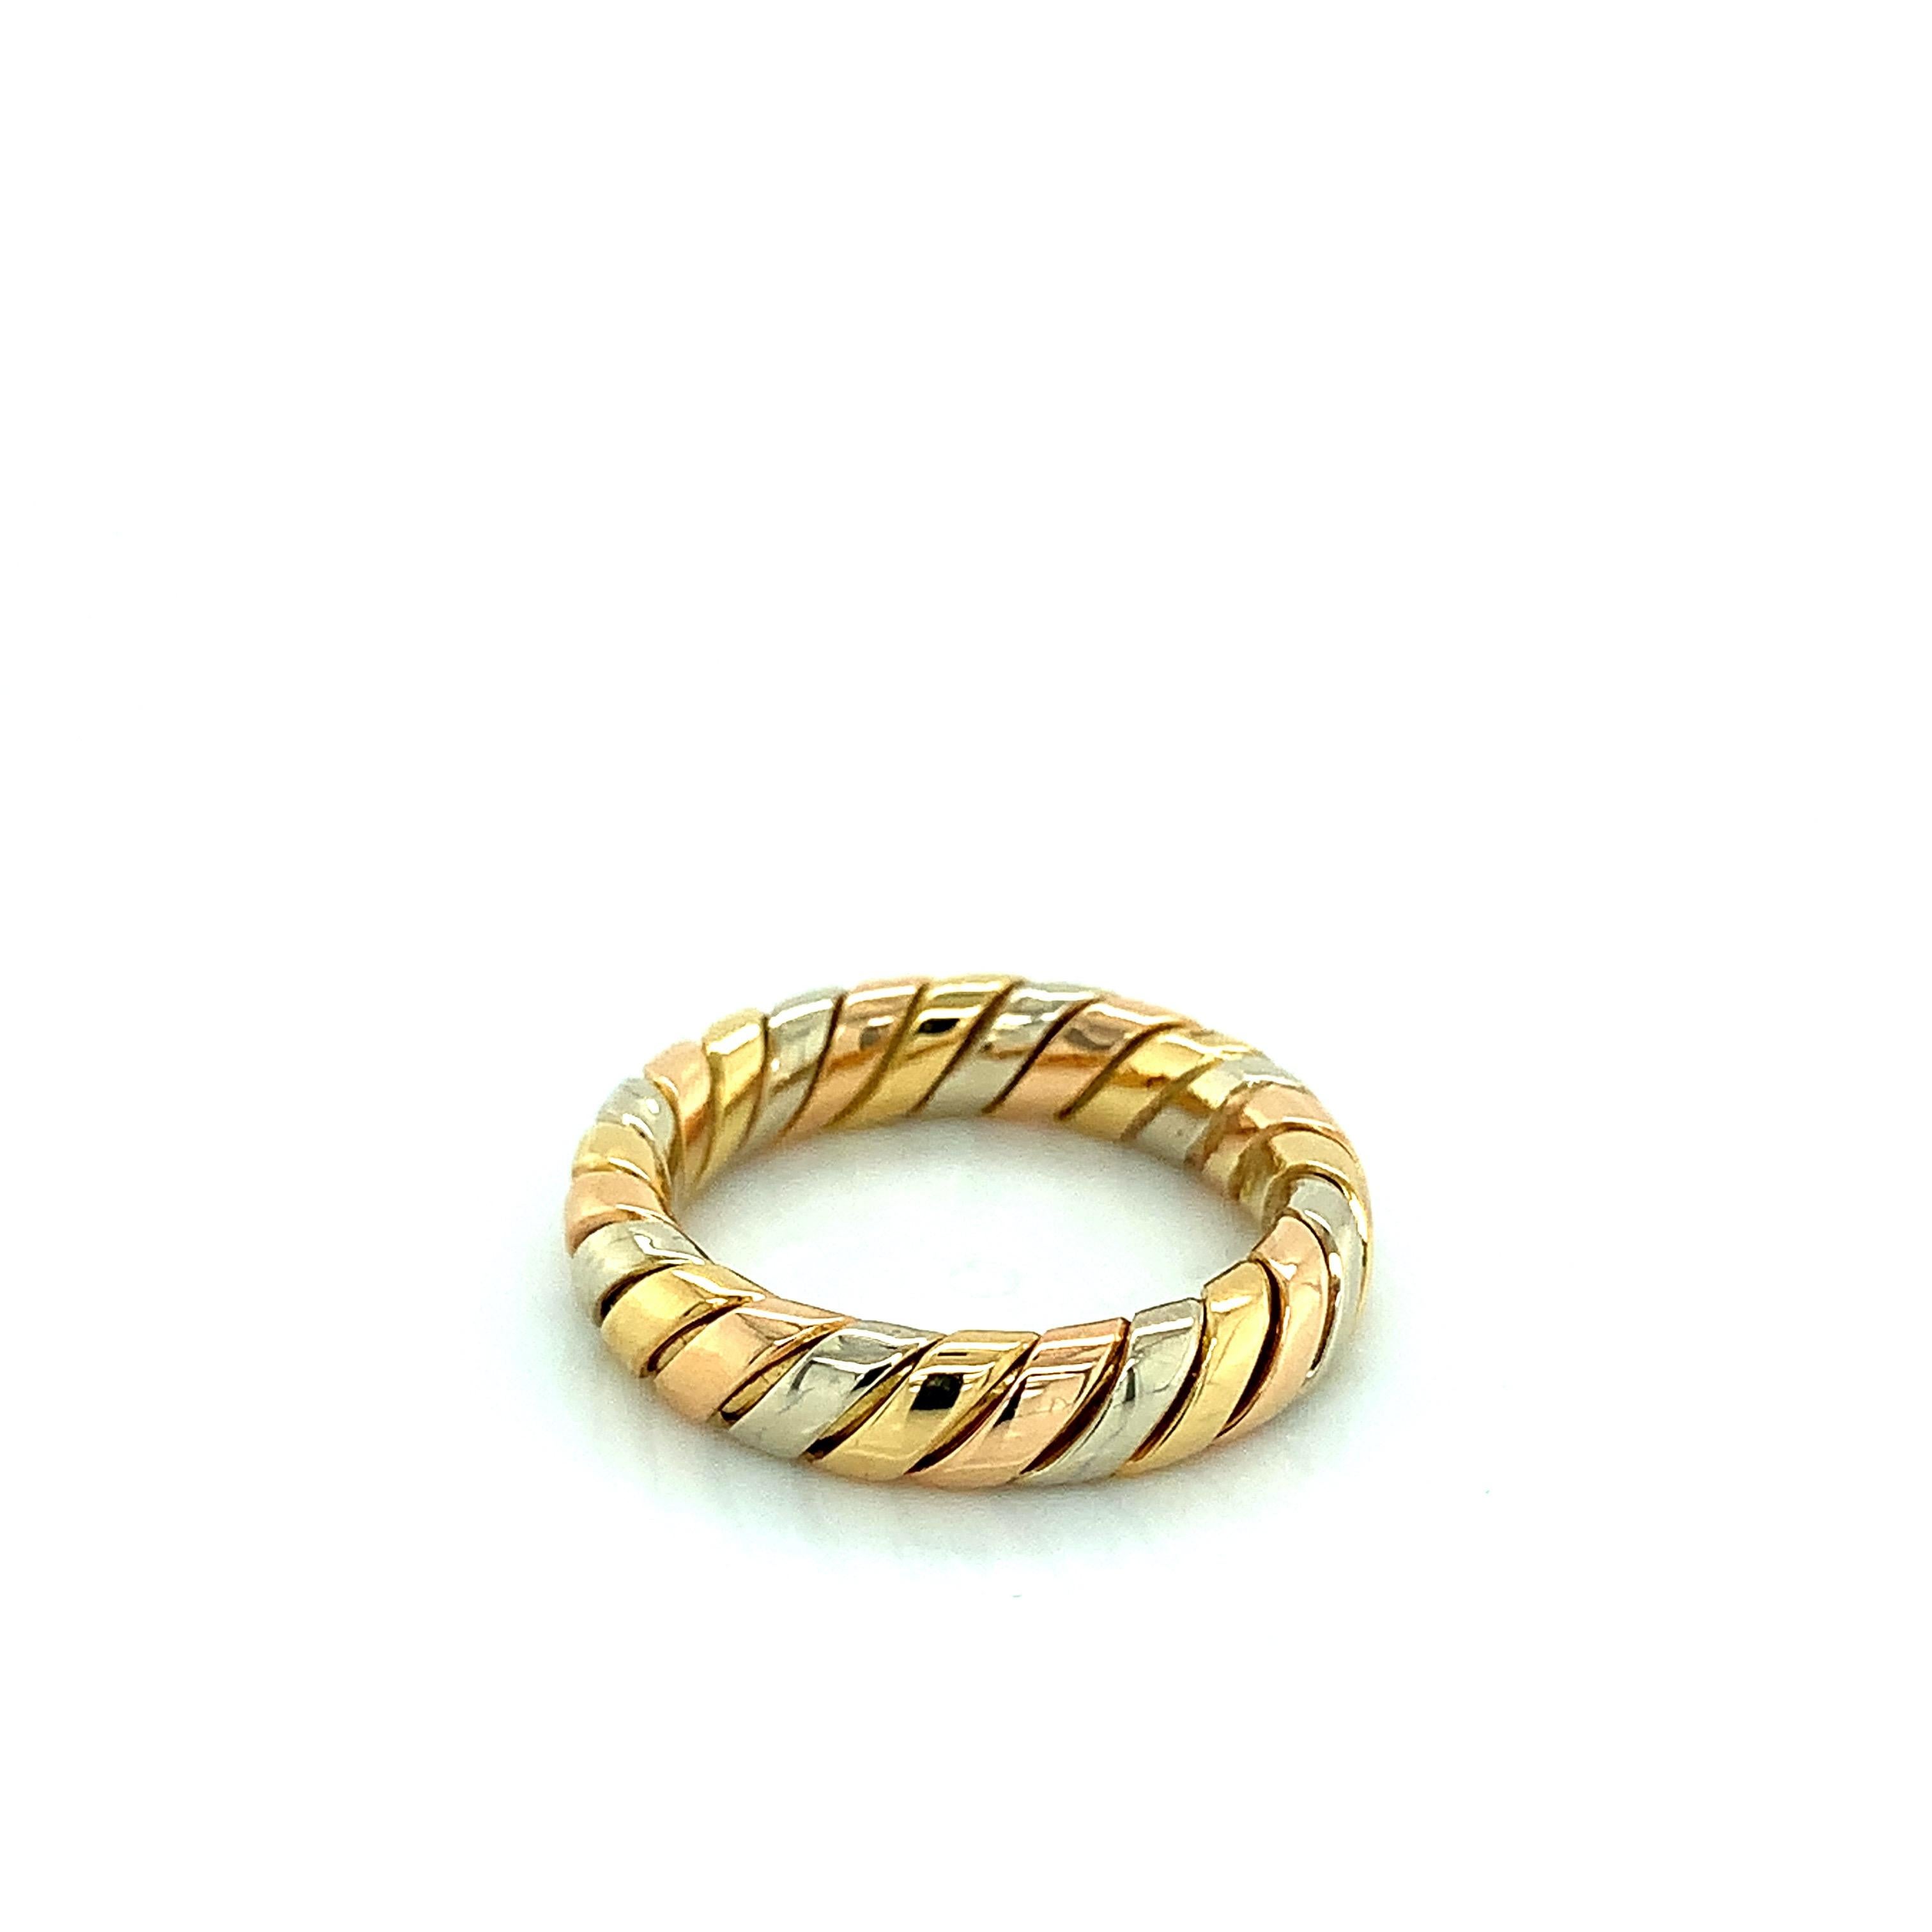 Bvlgari Gold Tubogas Ring In Excellent Condition For Sale In New York, NY